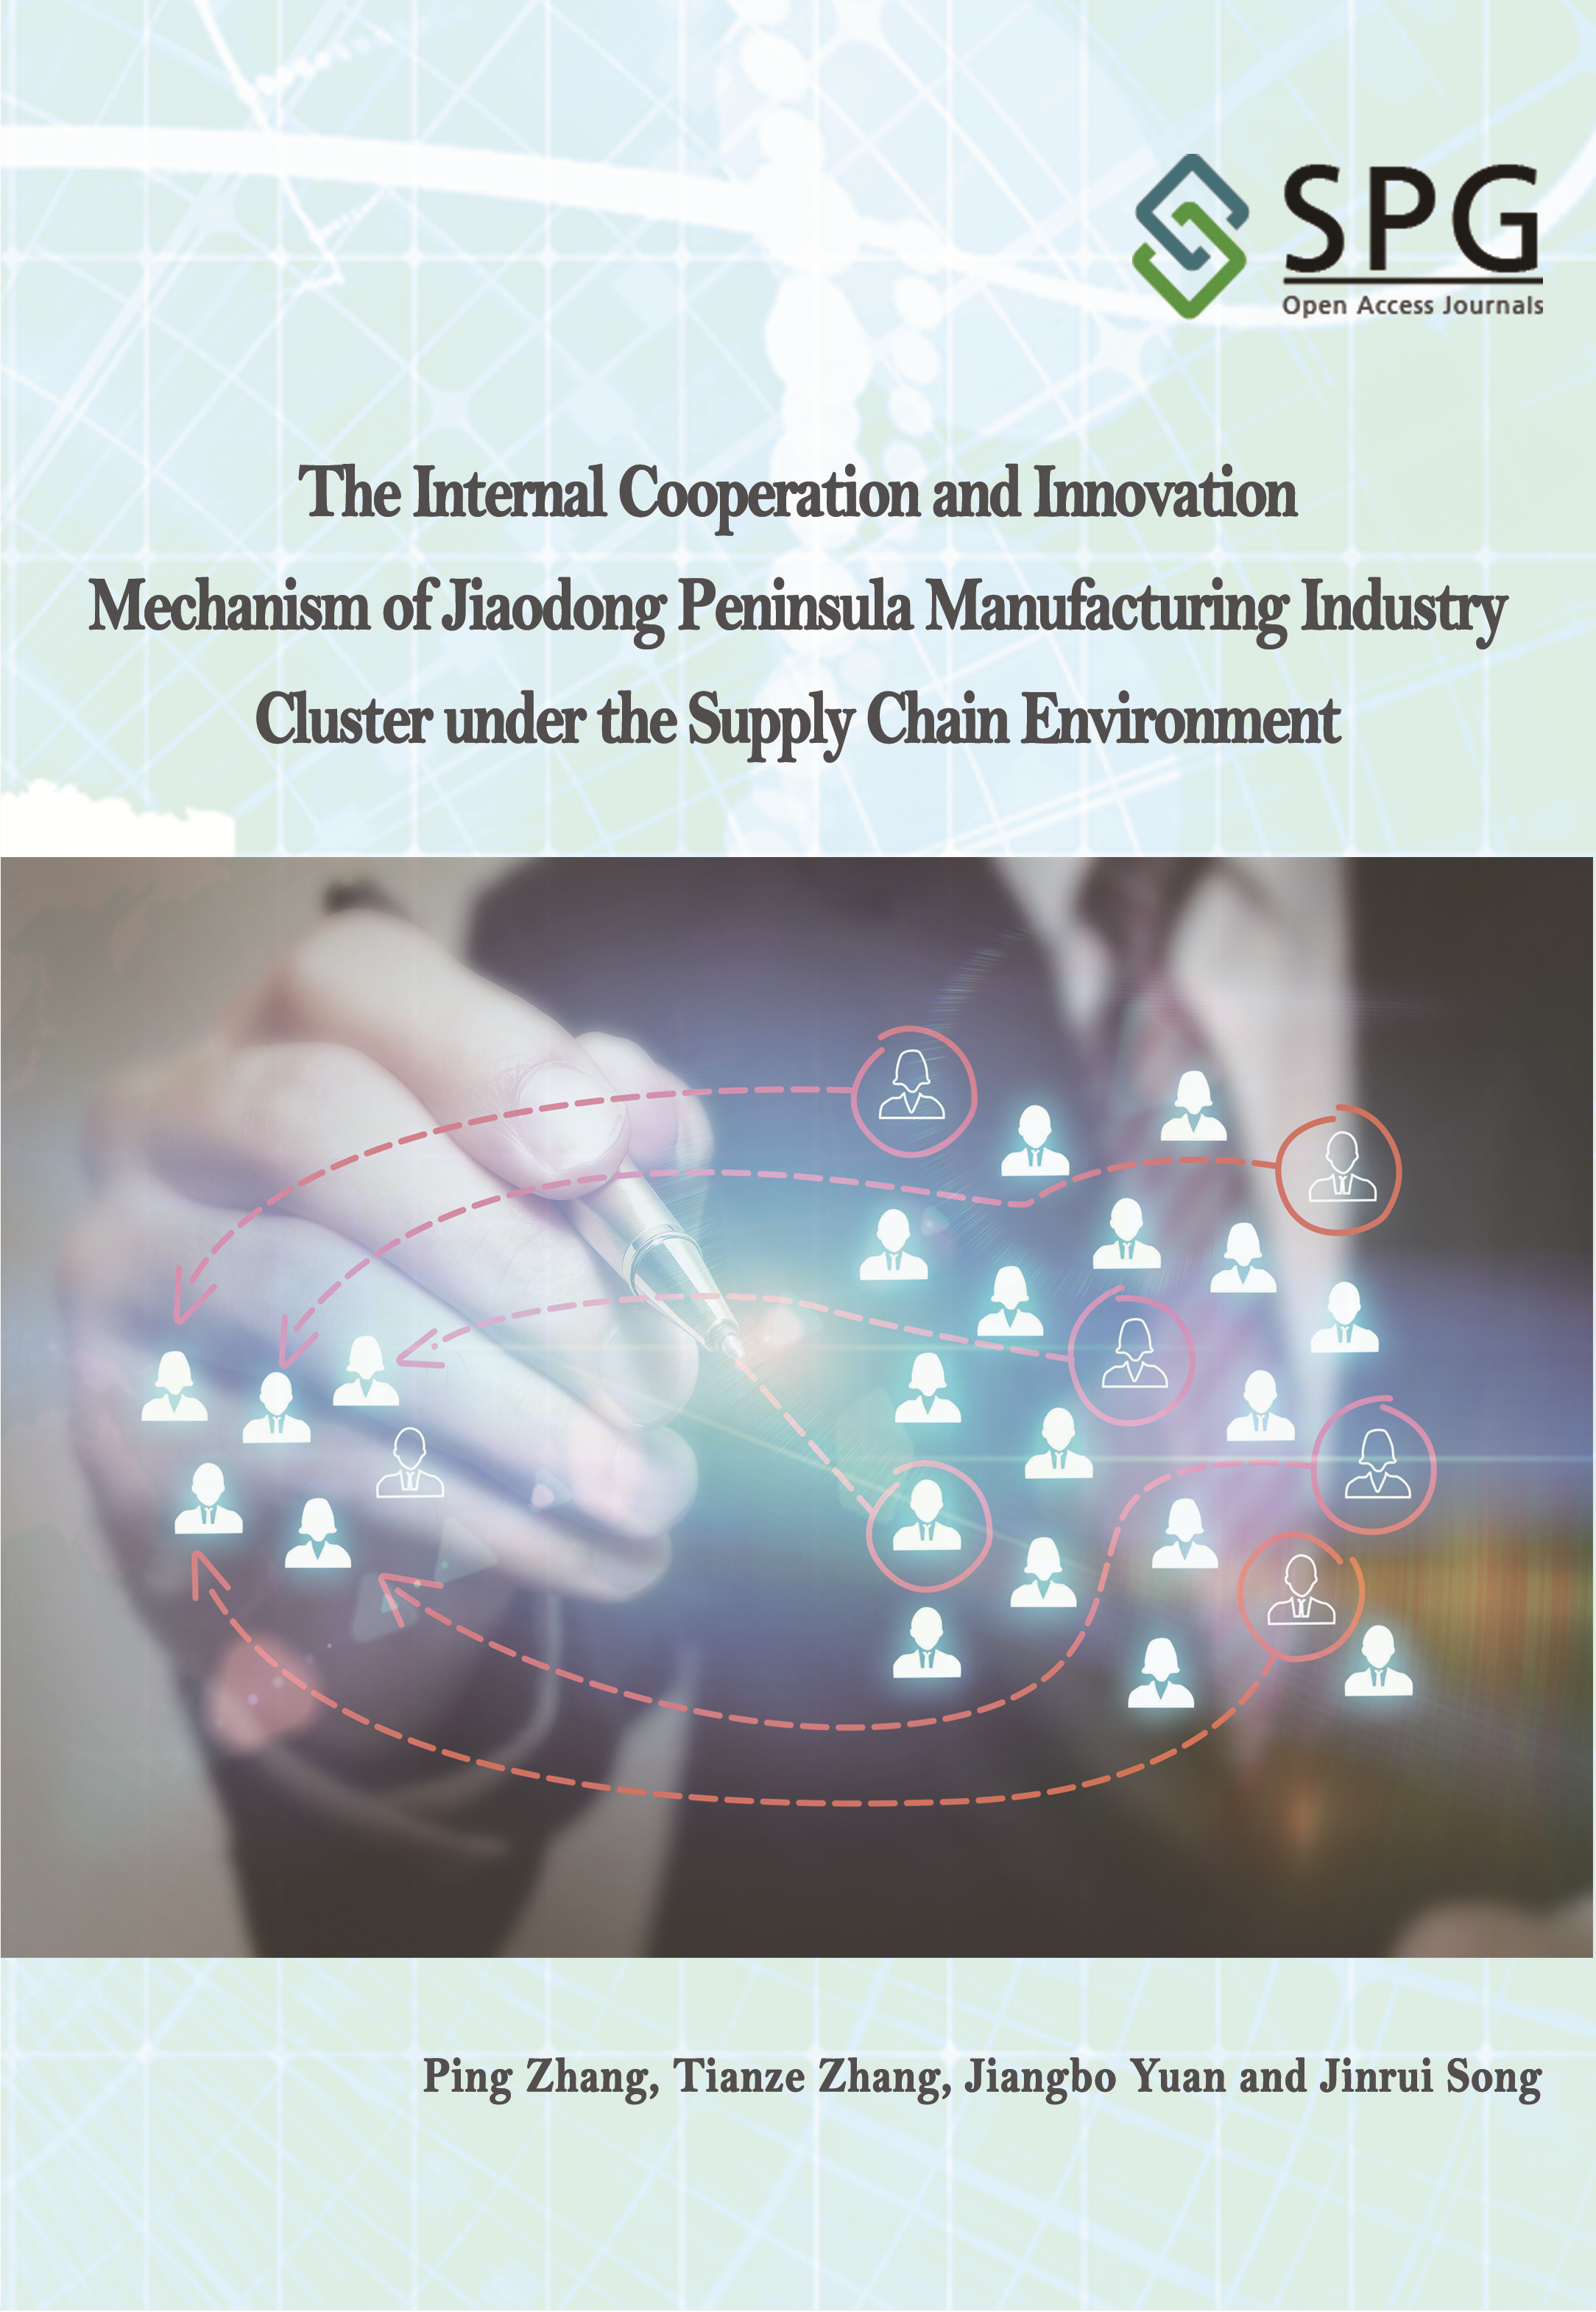 The Internal Cooperation and Innovation   Mechanism of Jiaodong Peninsula Manufacturing Industry Cluster under the Supply Chain Environment | Scholar Publishing Group